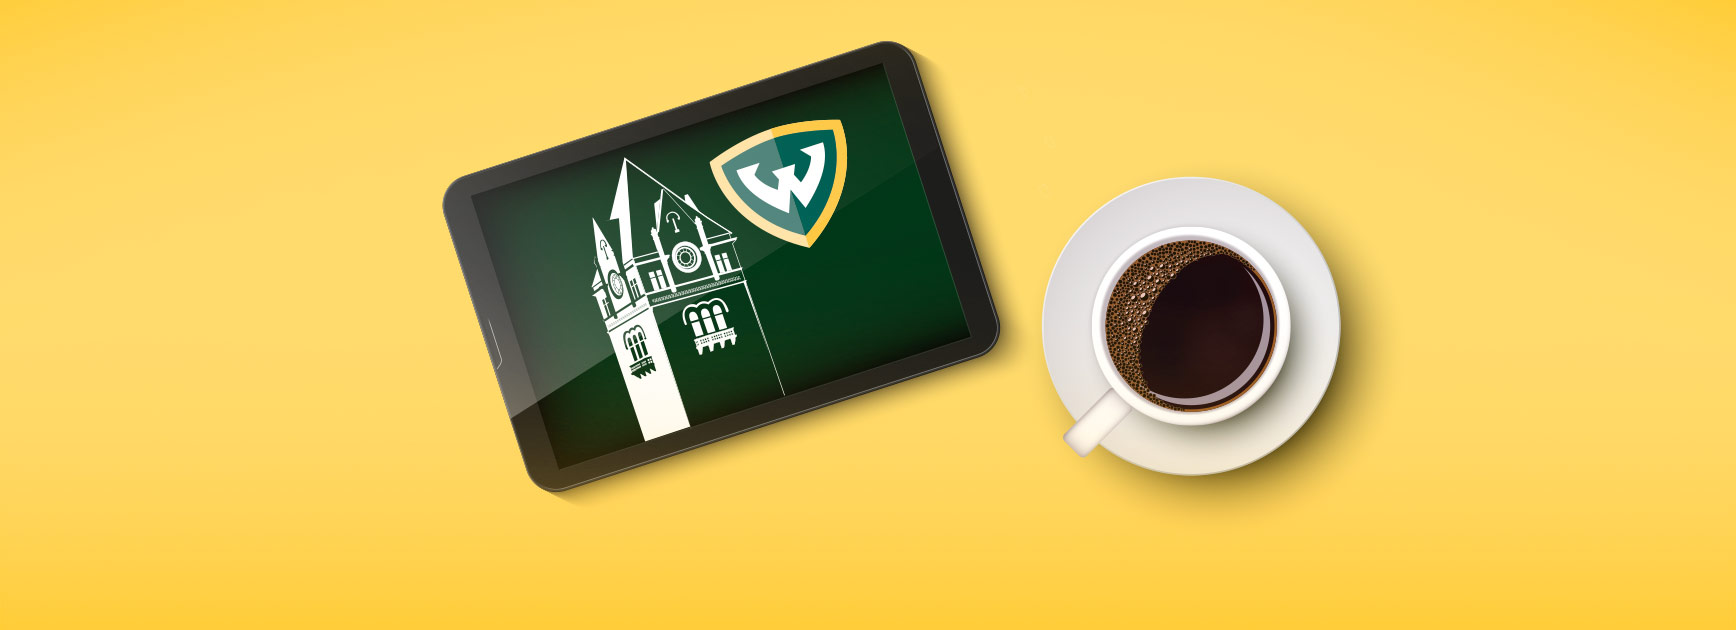 A coffee cup and a tablet with Old Main and Wayne State logo on the screen